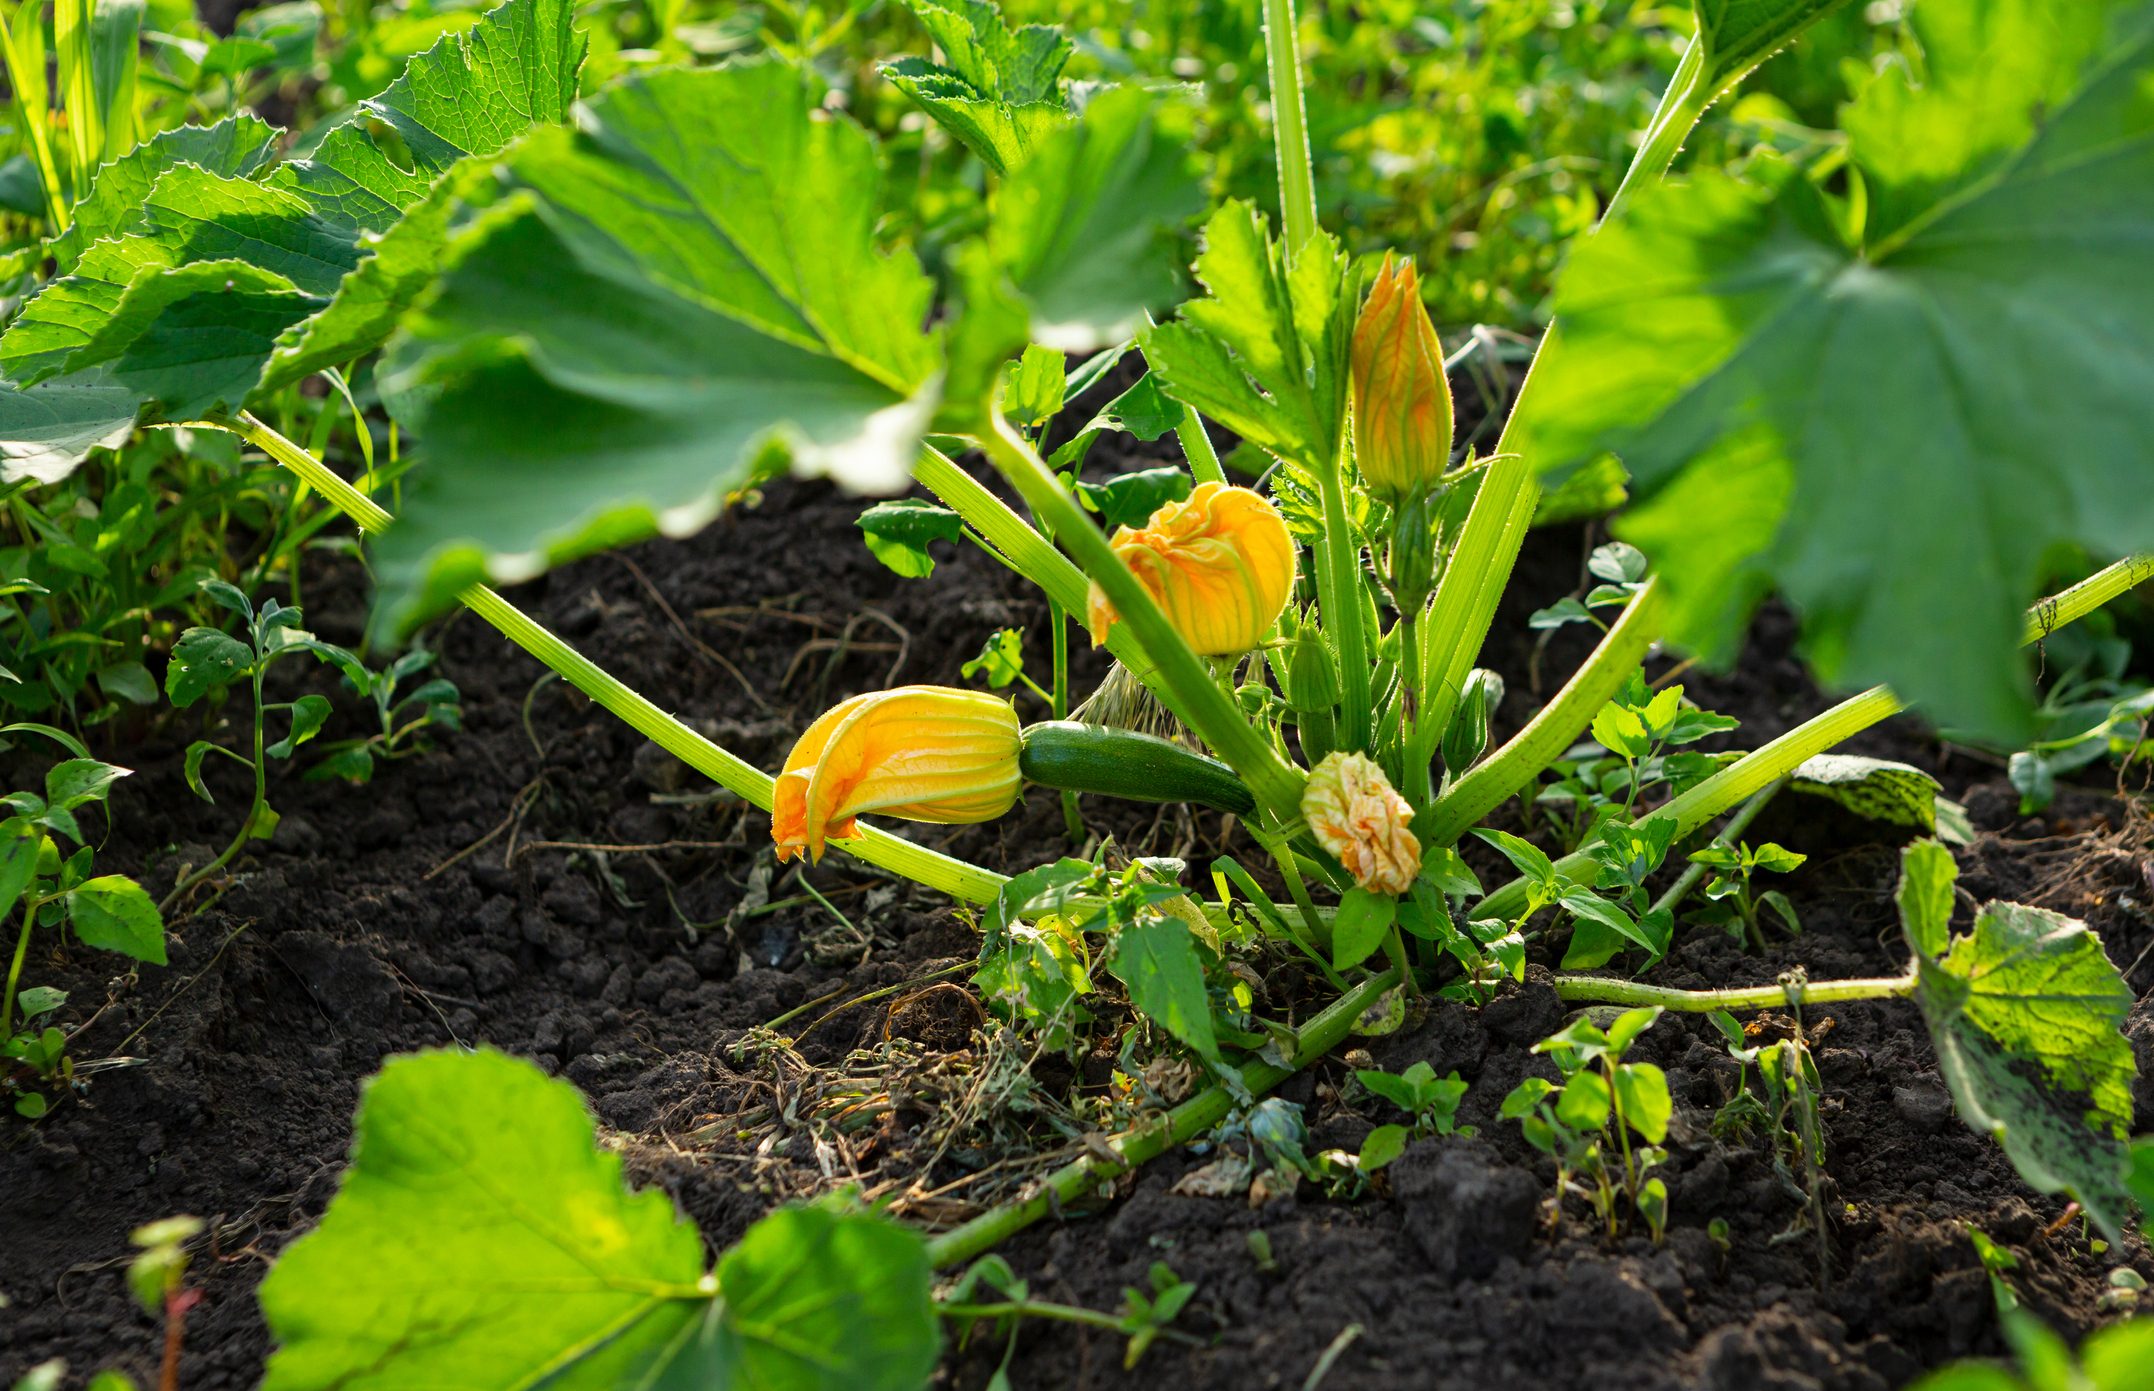 Guide to Growing Squash | The Family Handyman